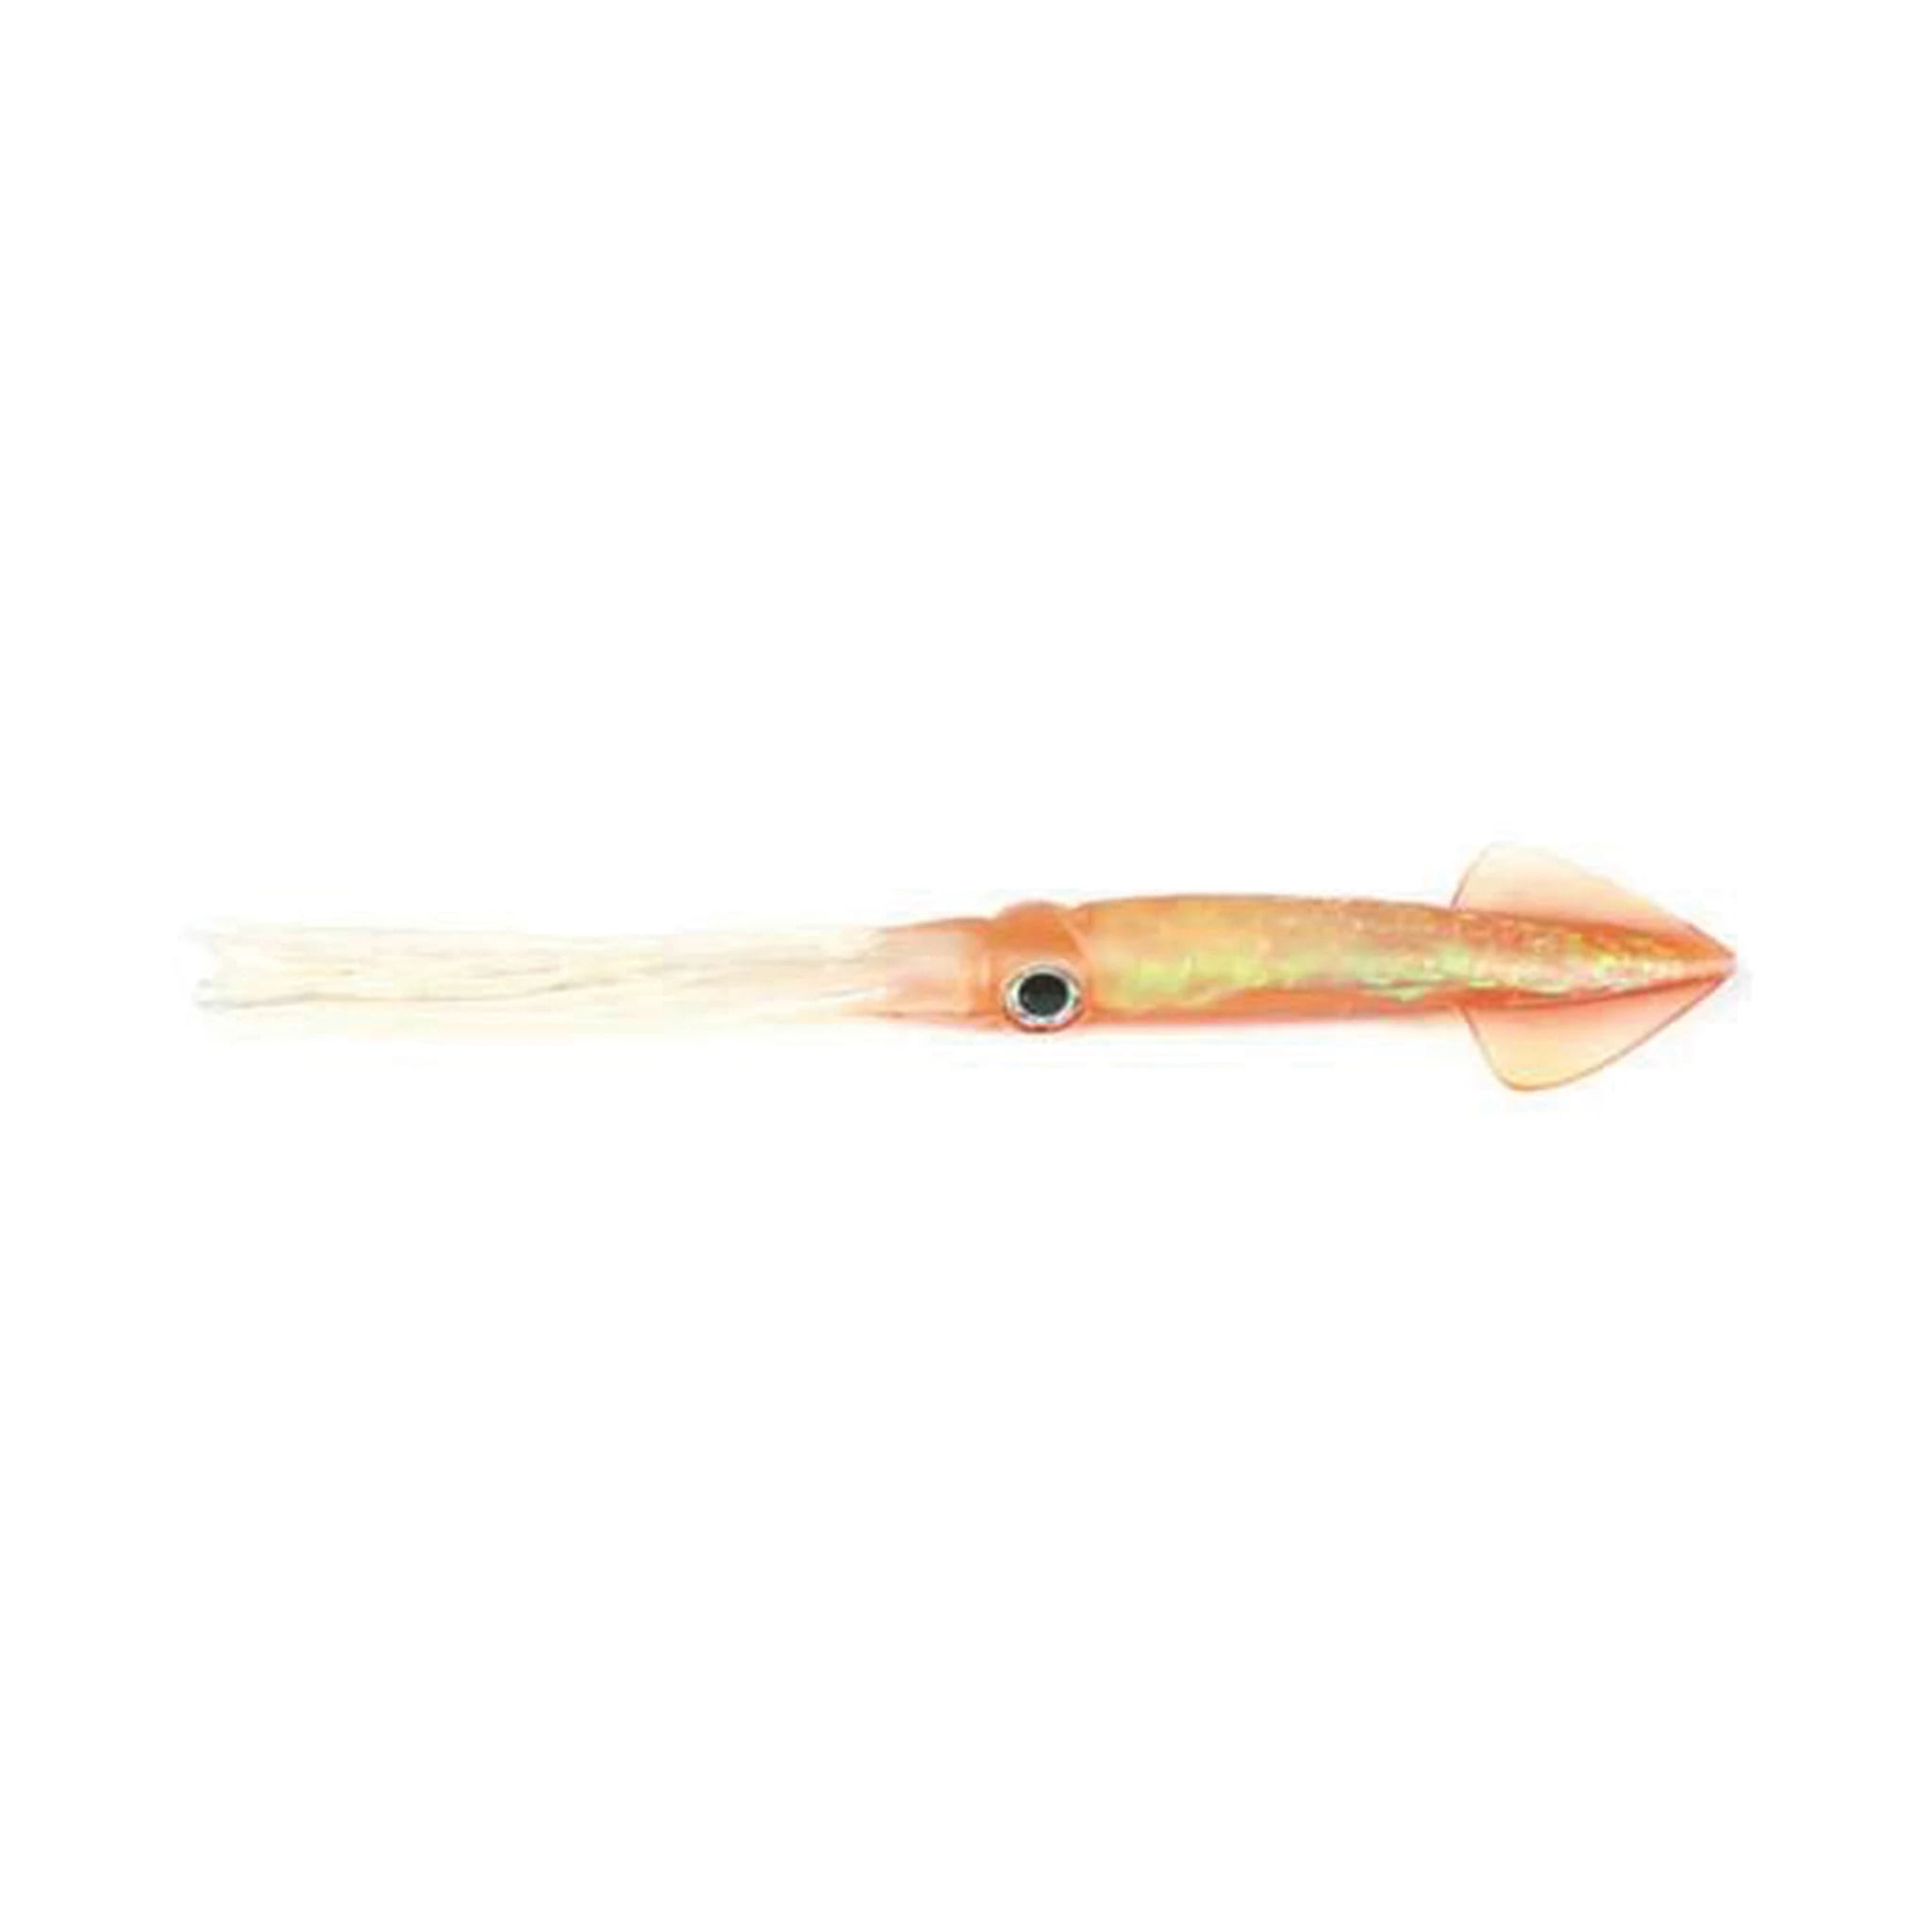 Fishing Squid Skirts Octopus Lures, 30pcs Glow Soft Plastic Fishing Bait  Trolling Lure Saltwater for Bass Salmon Trout Multicolored 7cm 9cm 11cm 